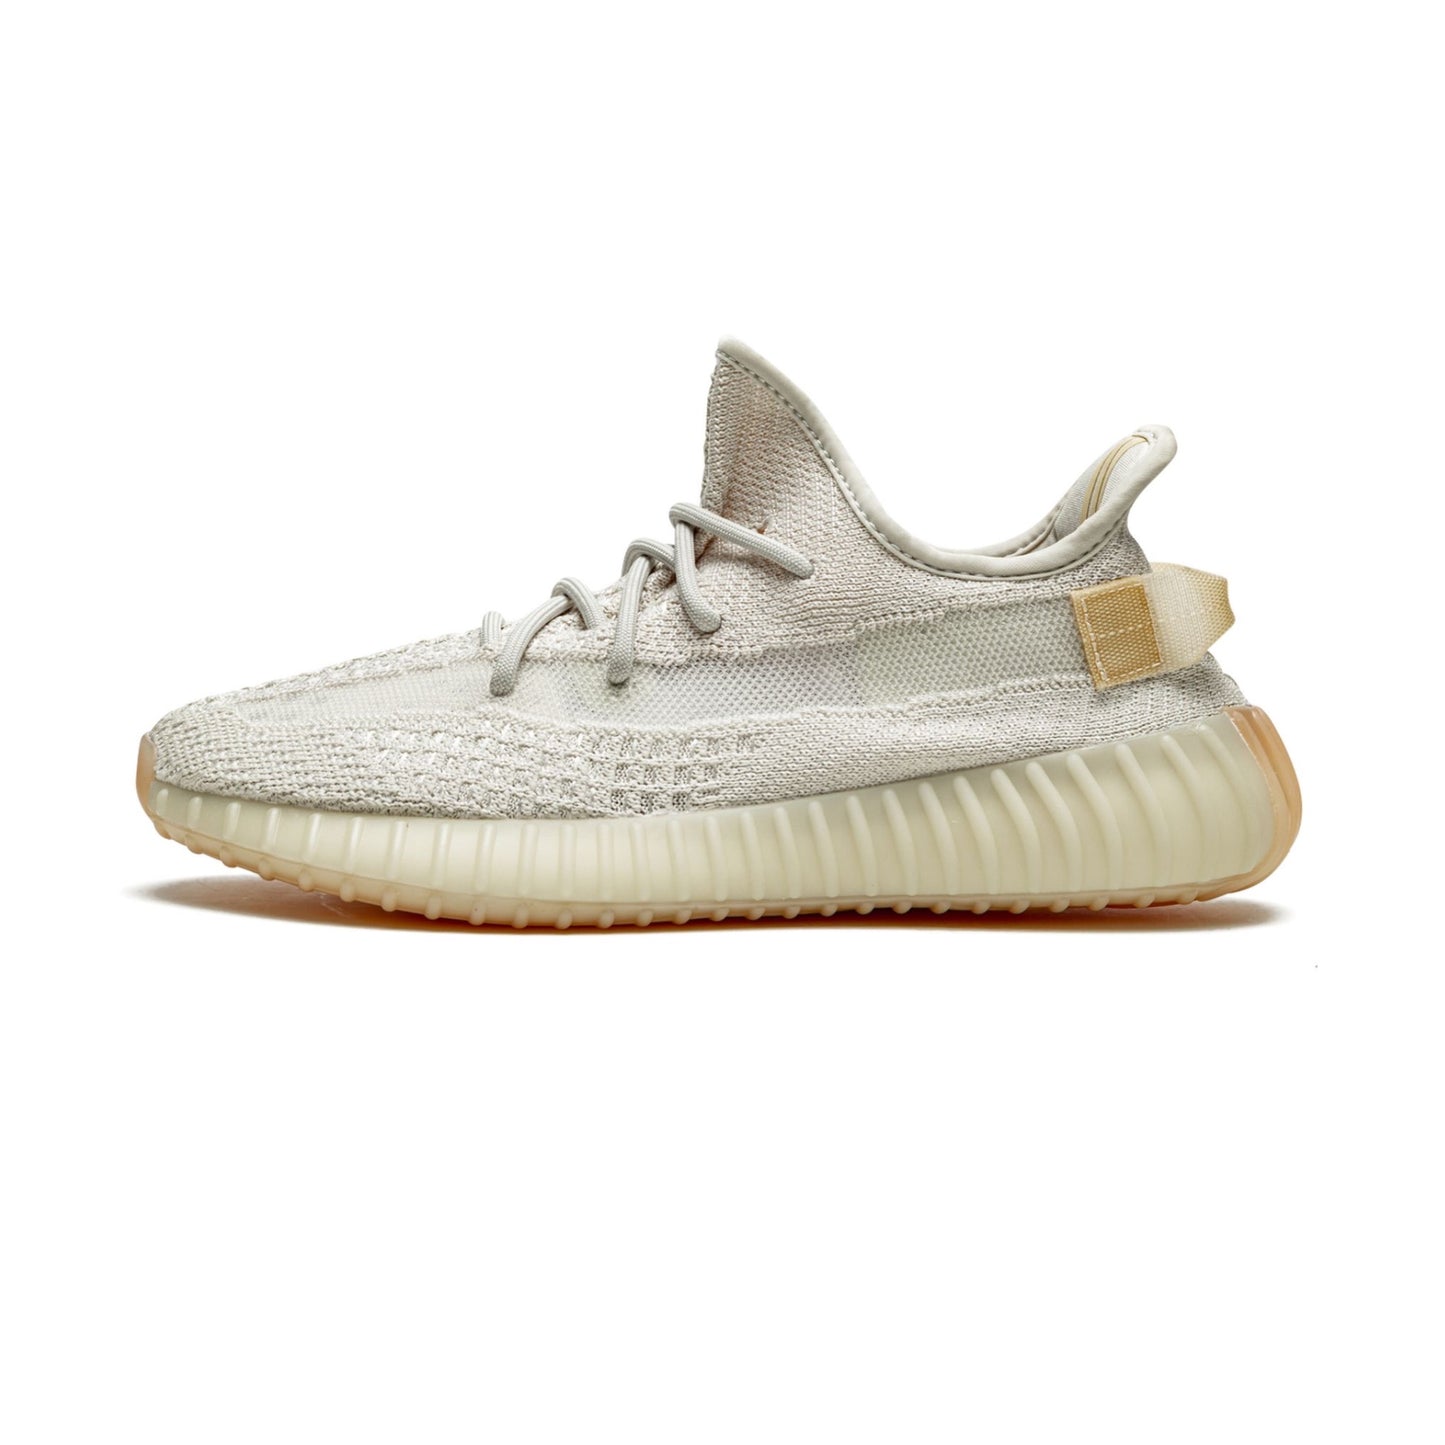 Yeezy Boost 350 V2 Light By Adidas